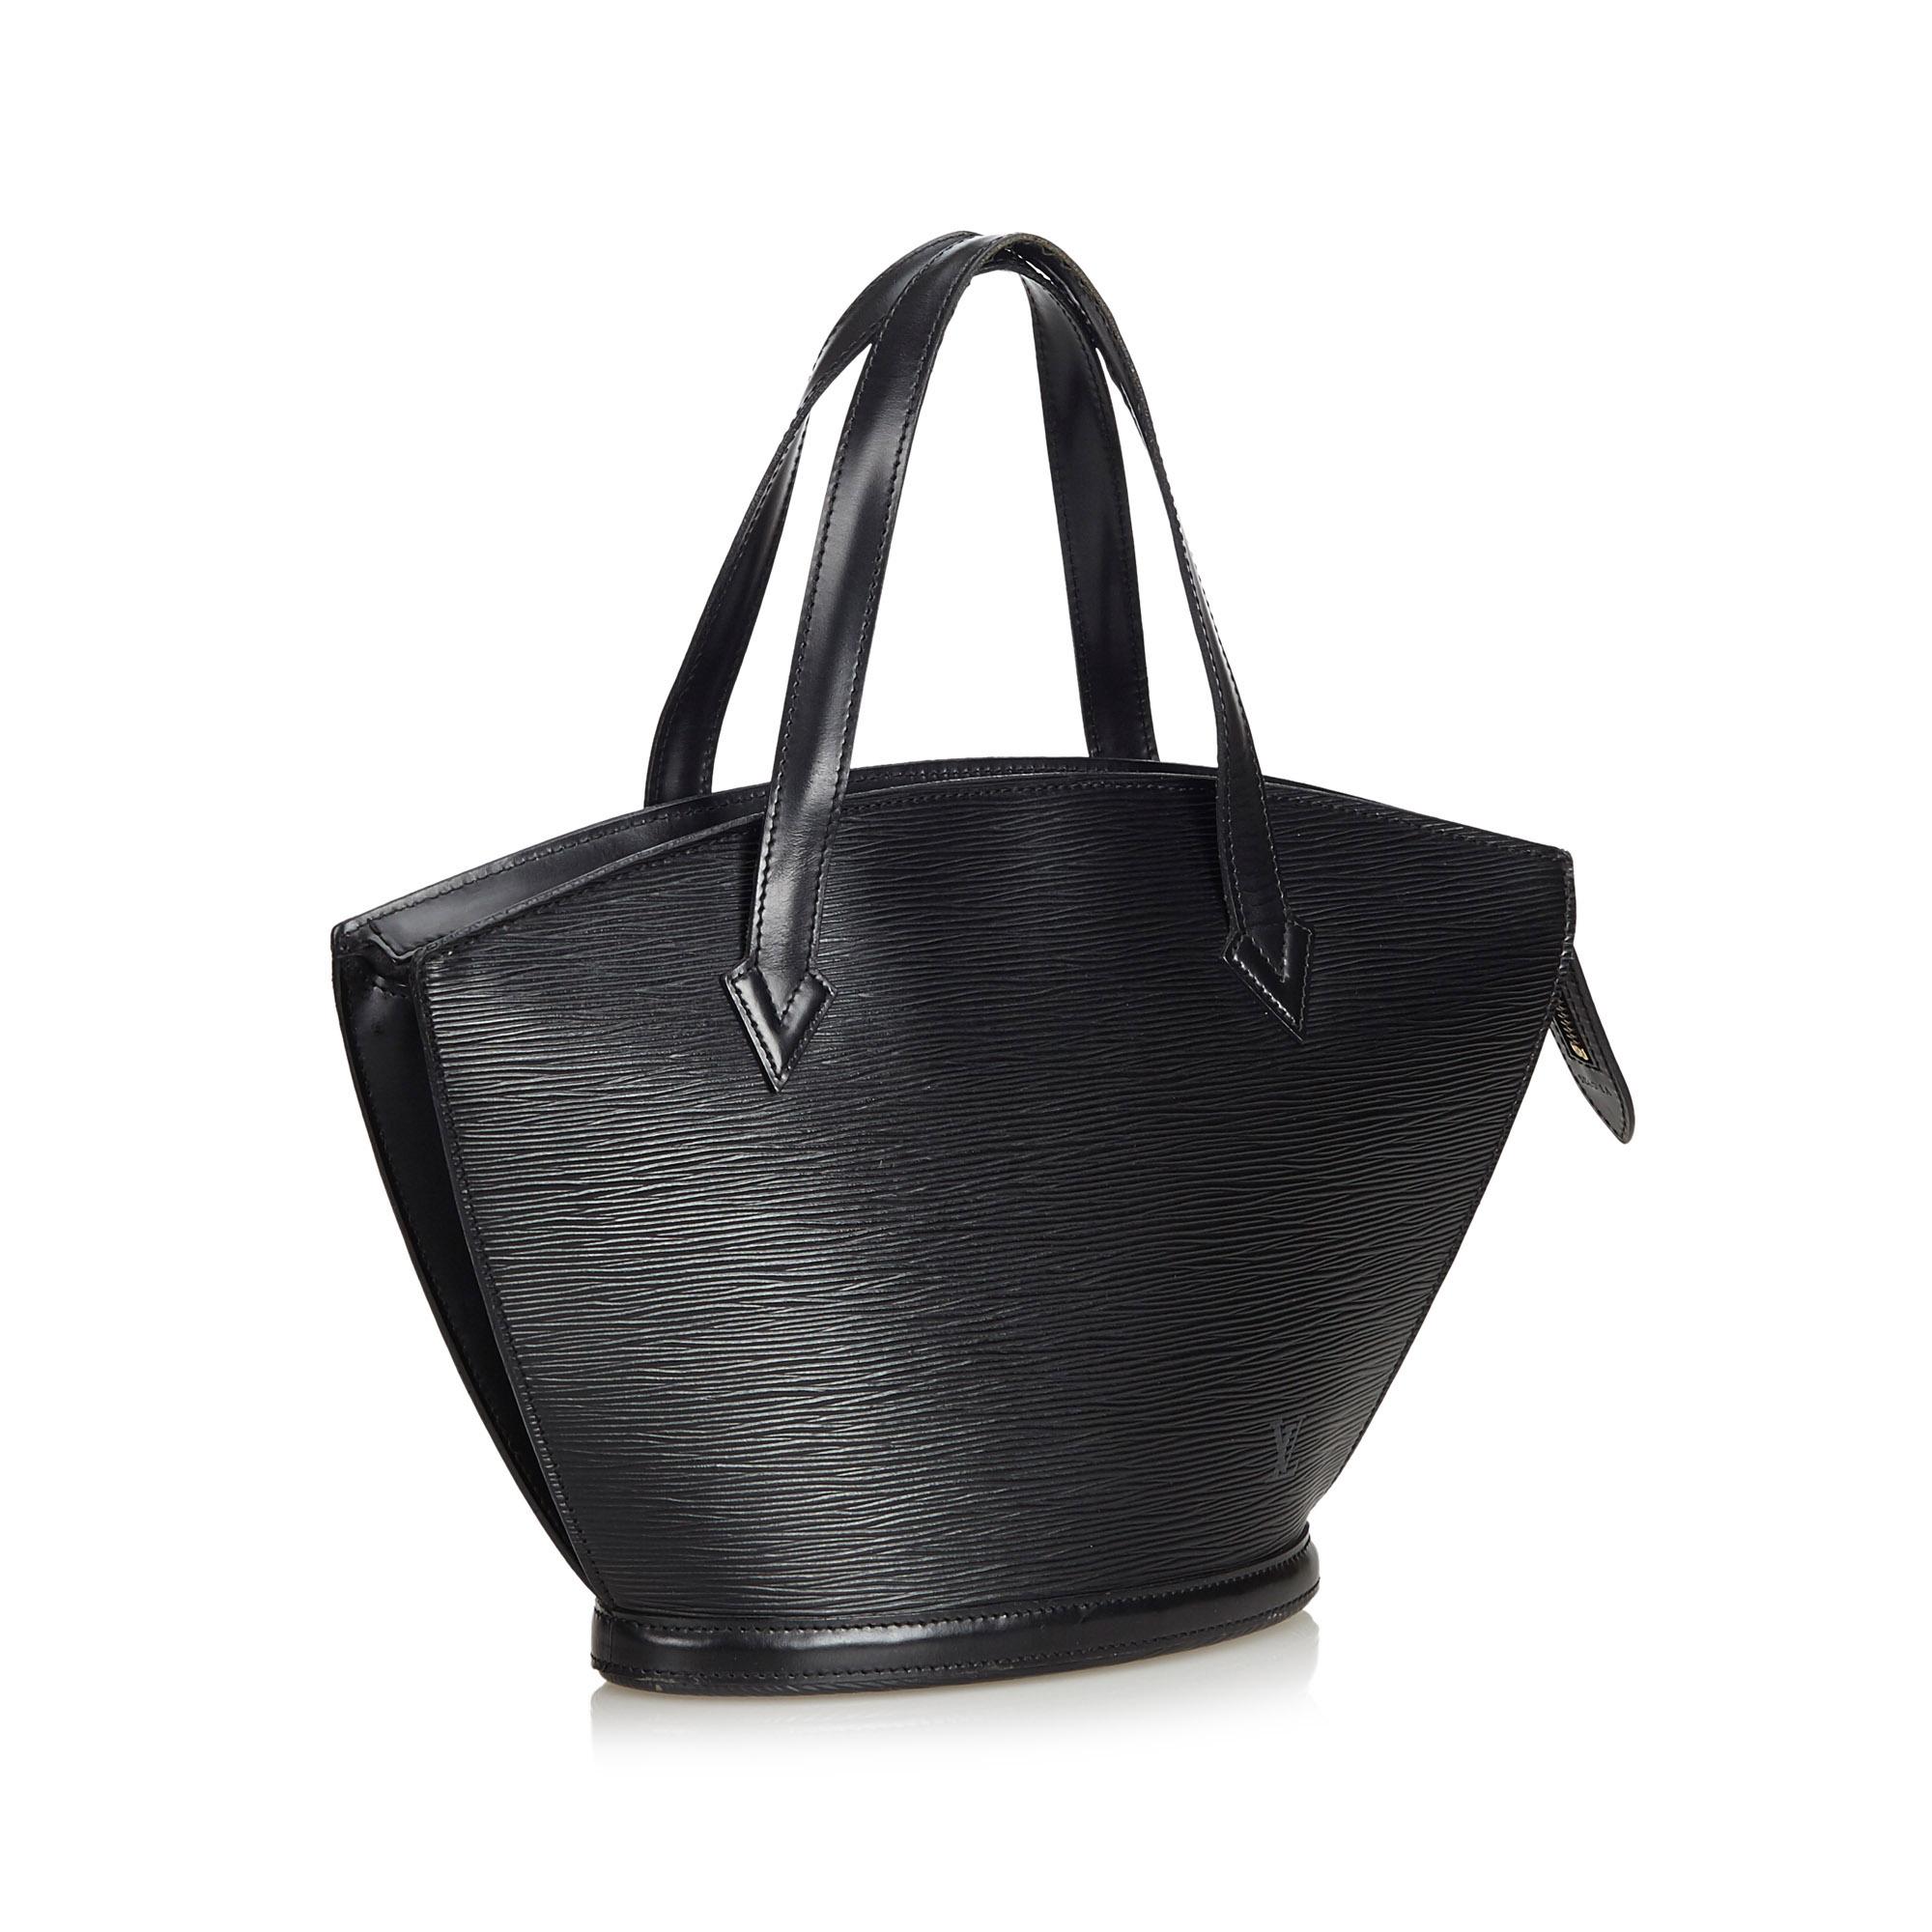 The Louis Vuitton St Jacques PM black tote features a structured epi leather body, a top zip closure and an interior zip pocket.

Serial number: VI0935
Strap drop: 25 cm